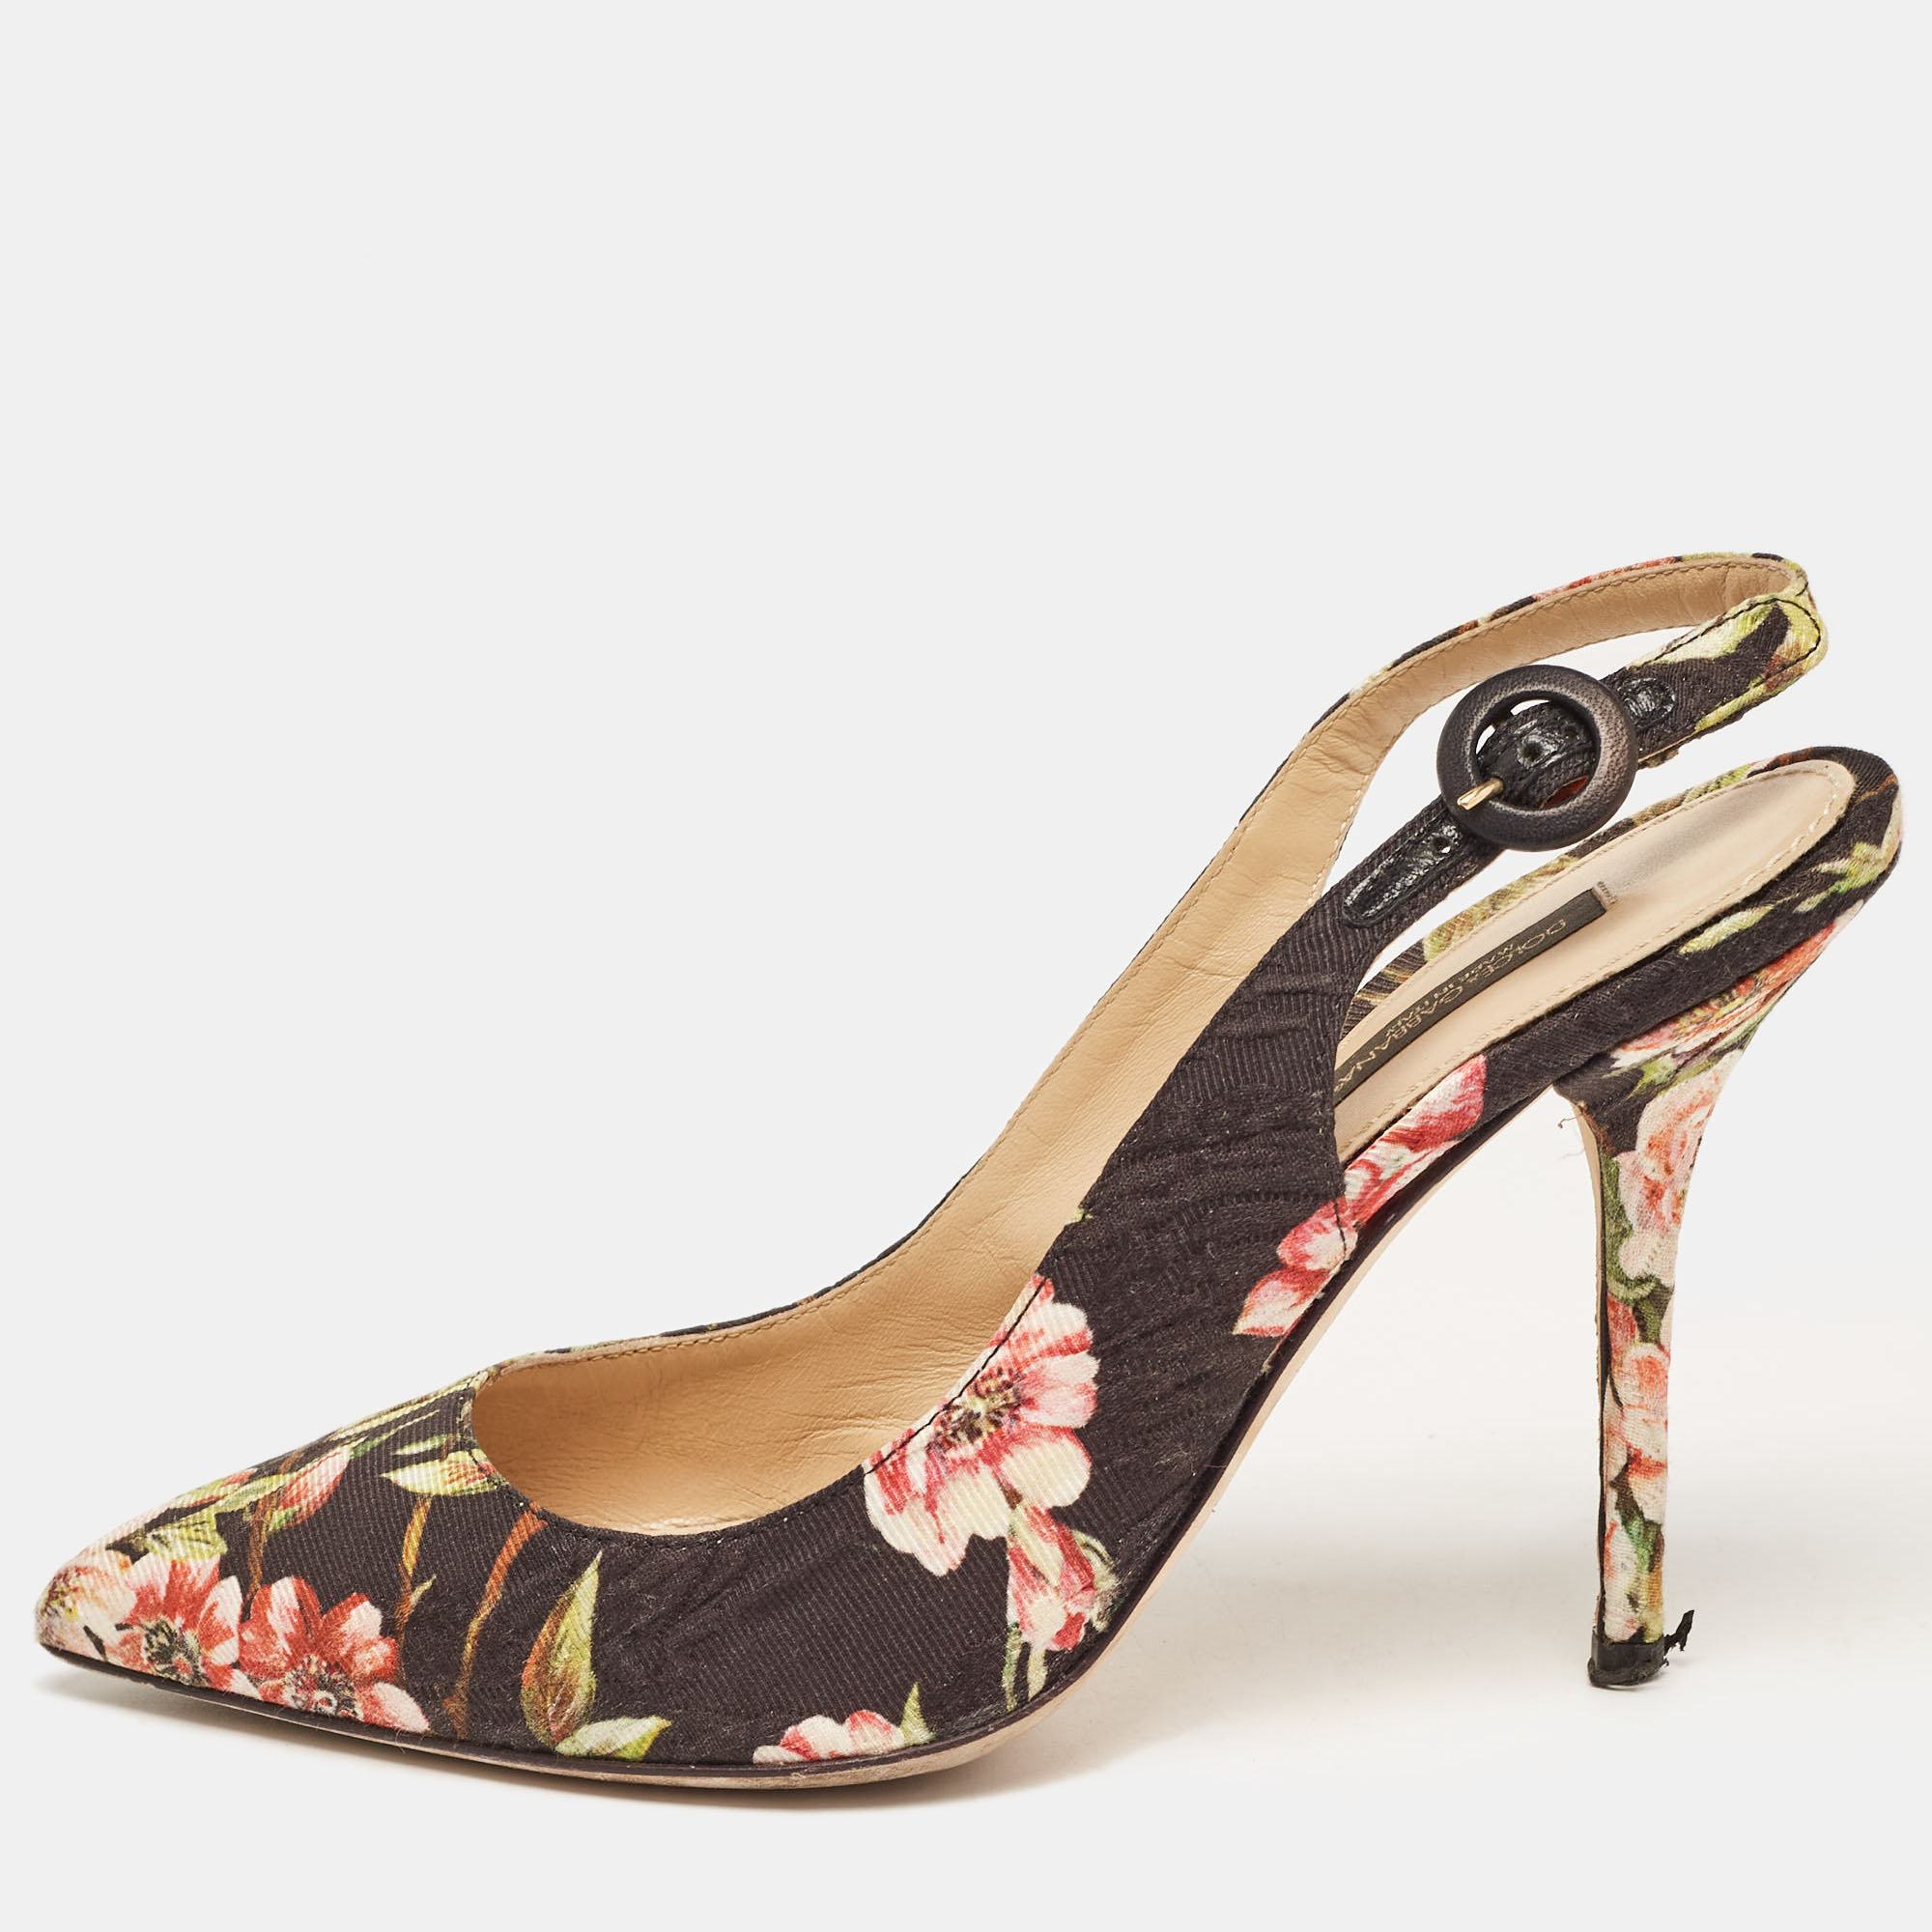 Pre-owned Dolce & Gabbana Multicolor Floral Print Brocade Slingback Pointed Toe Pumps Size 38